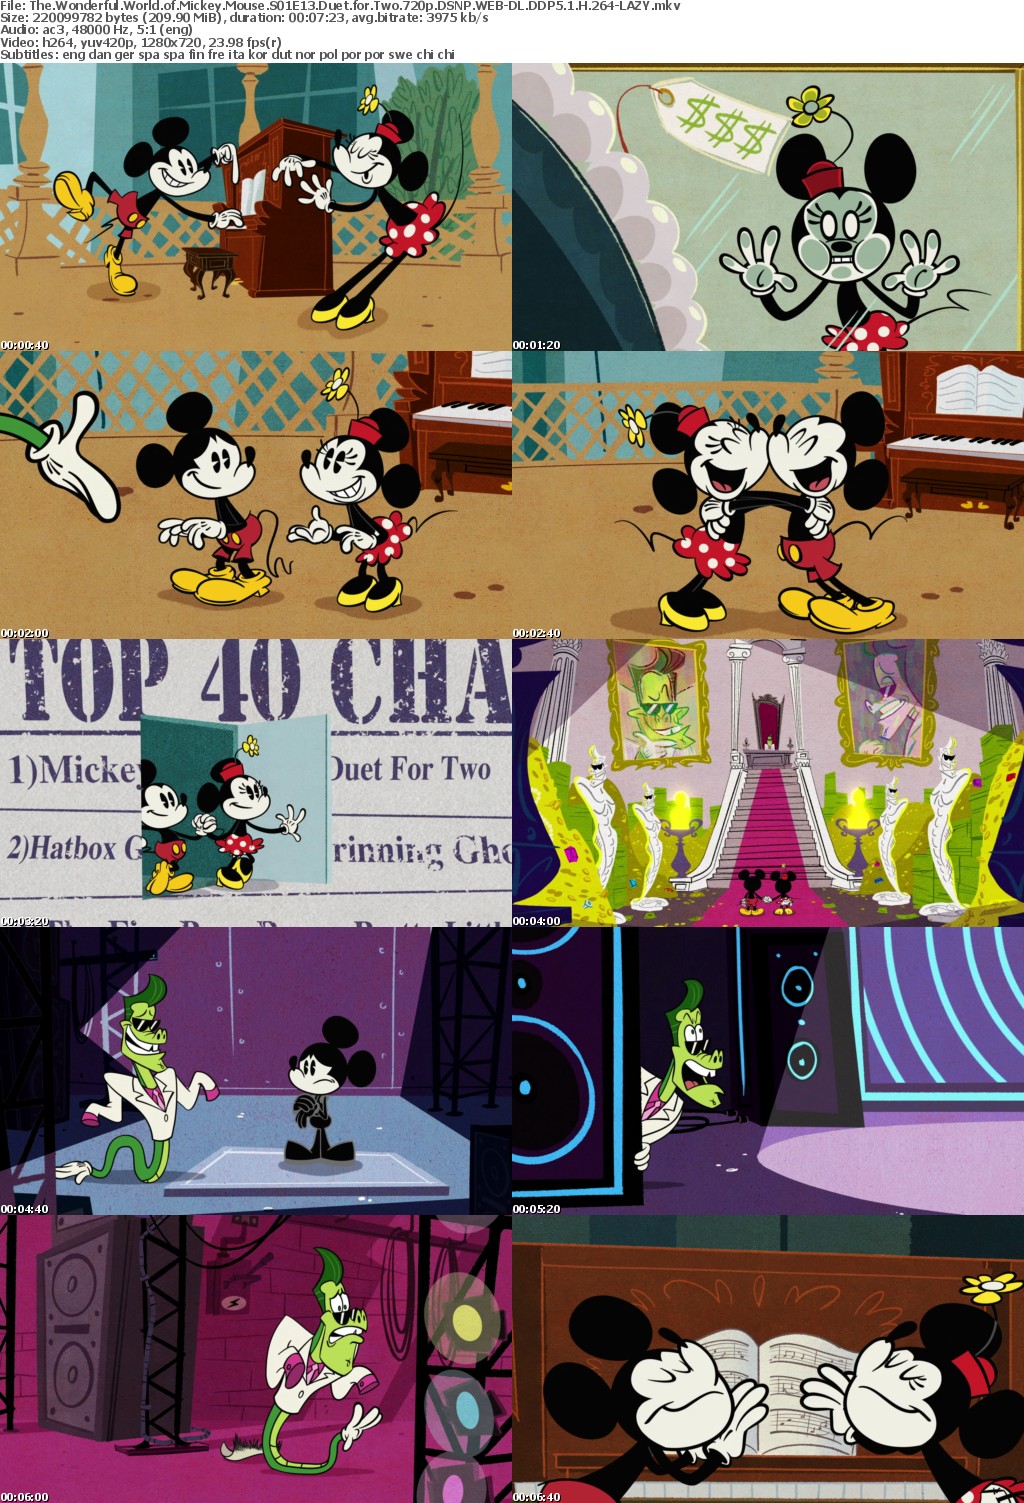 The Wonderful World of Mickey Mouse S01E13 Duet for Two 720p DSNP WEBRip DDP5 1 x264-LAZY